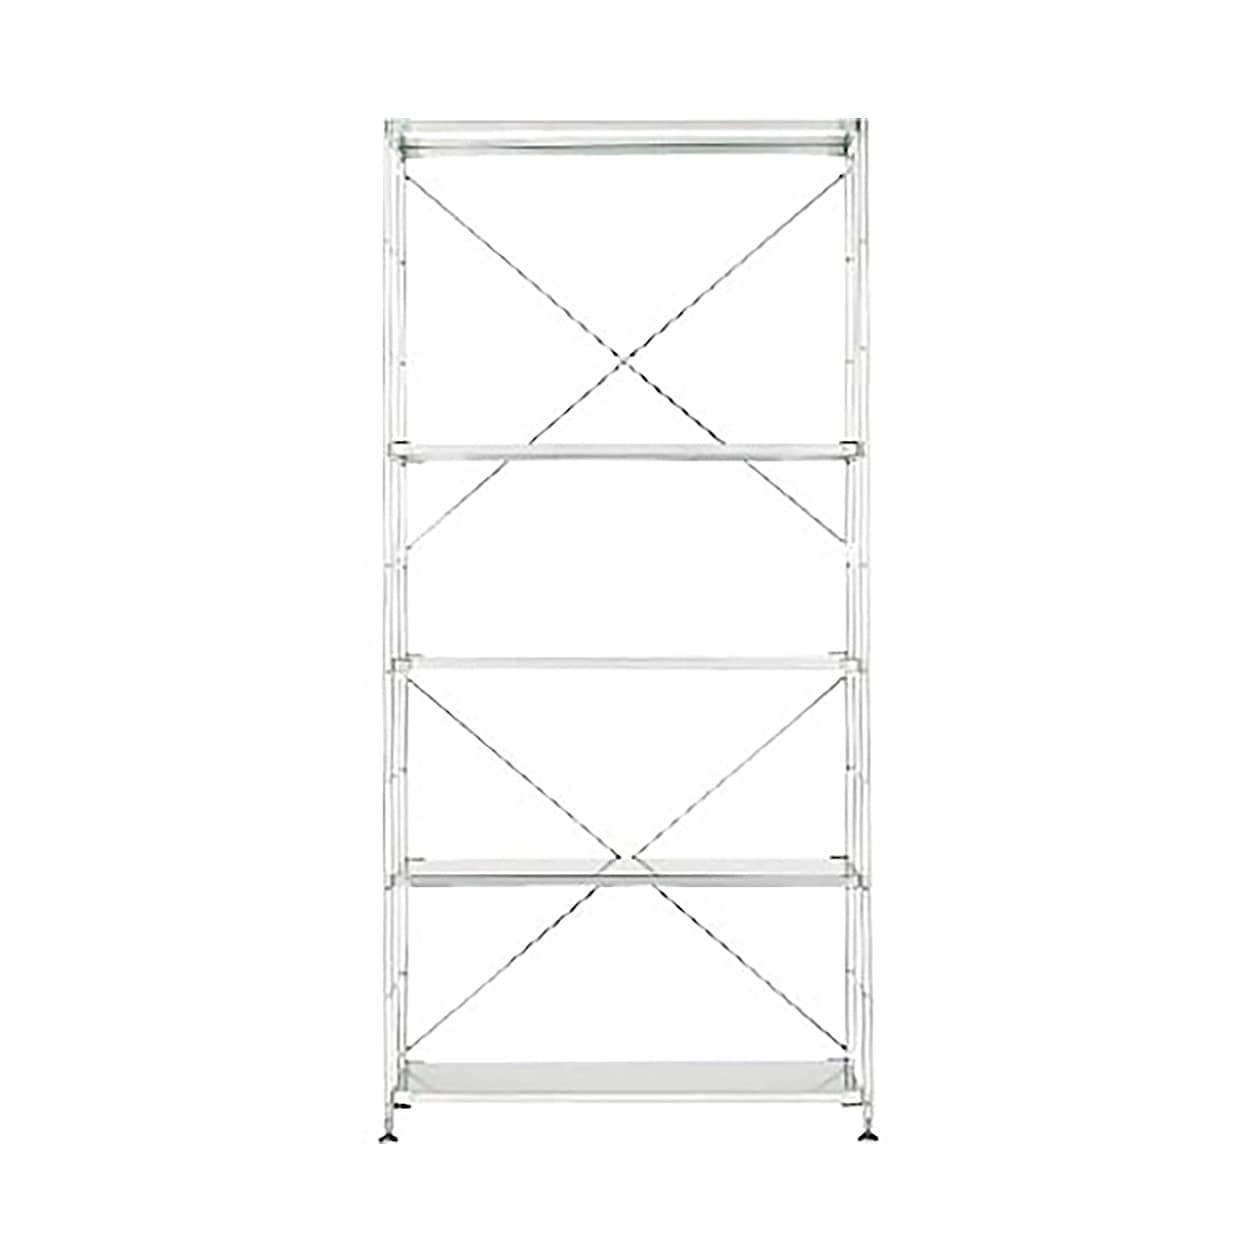 SUS Shelving Unit - Stainless Steel - Wide